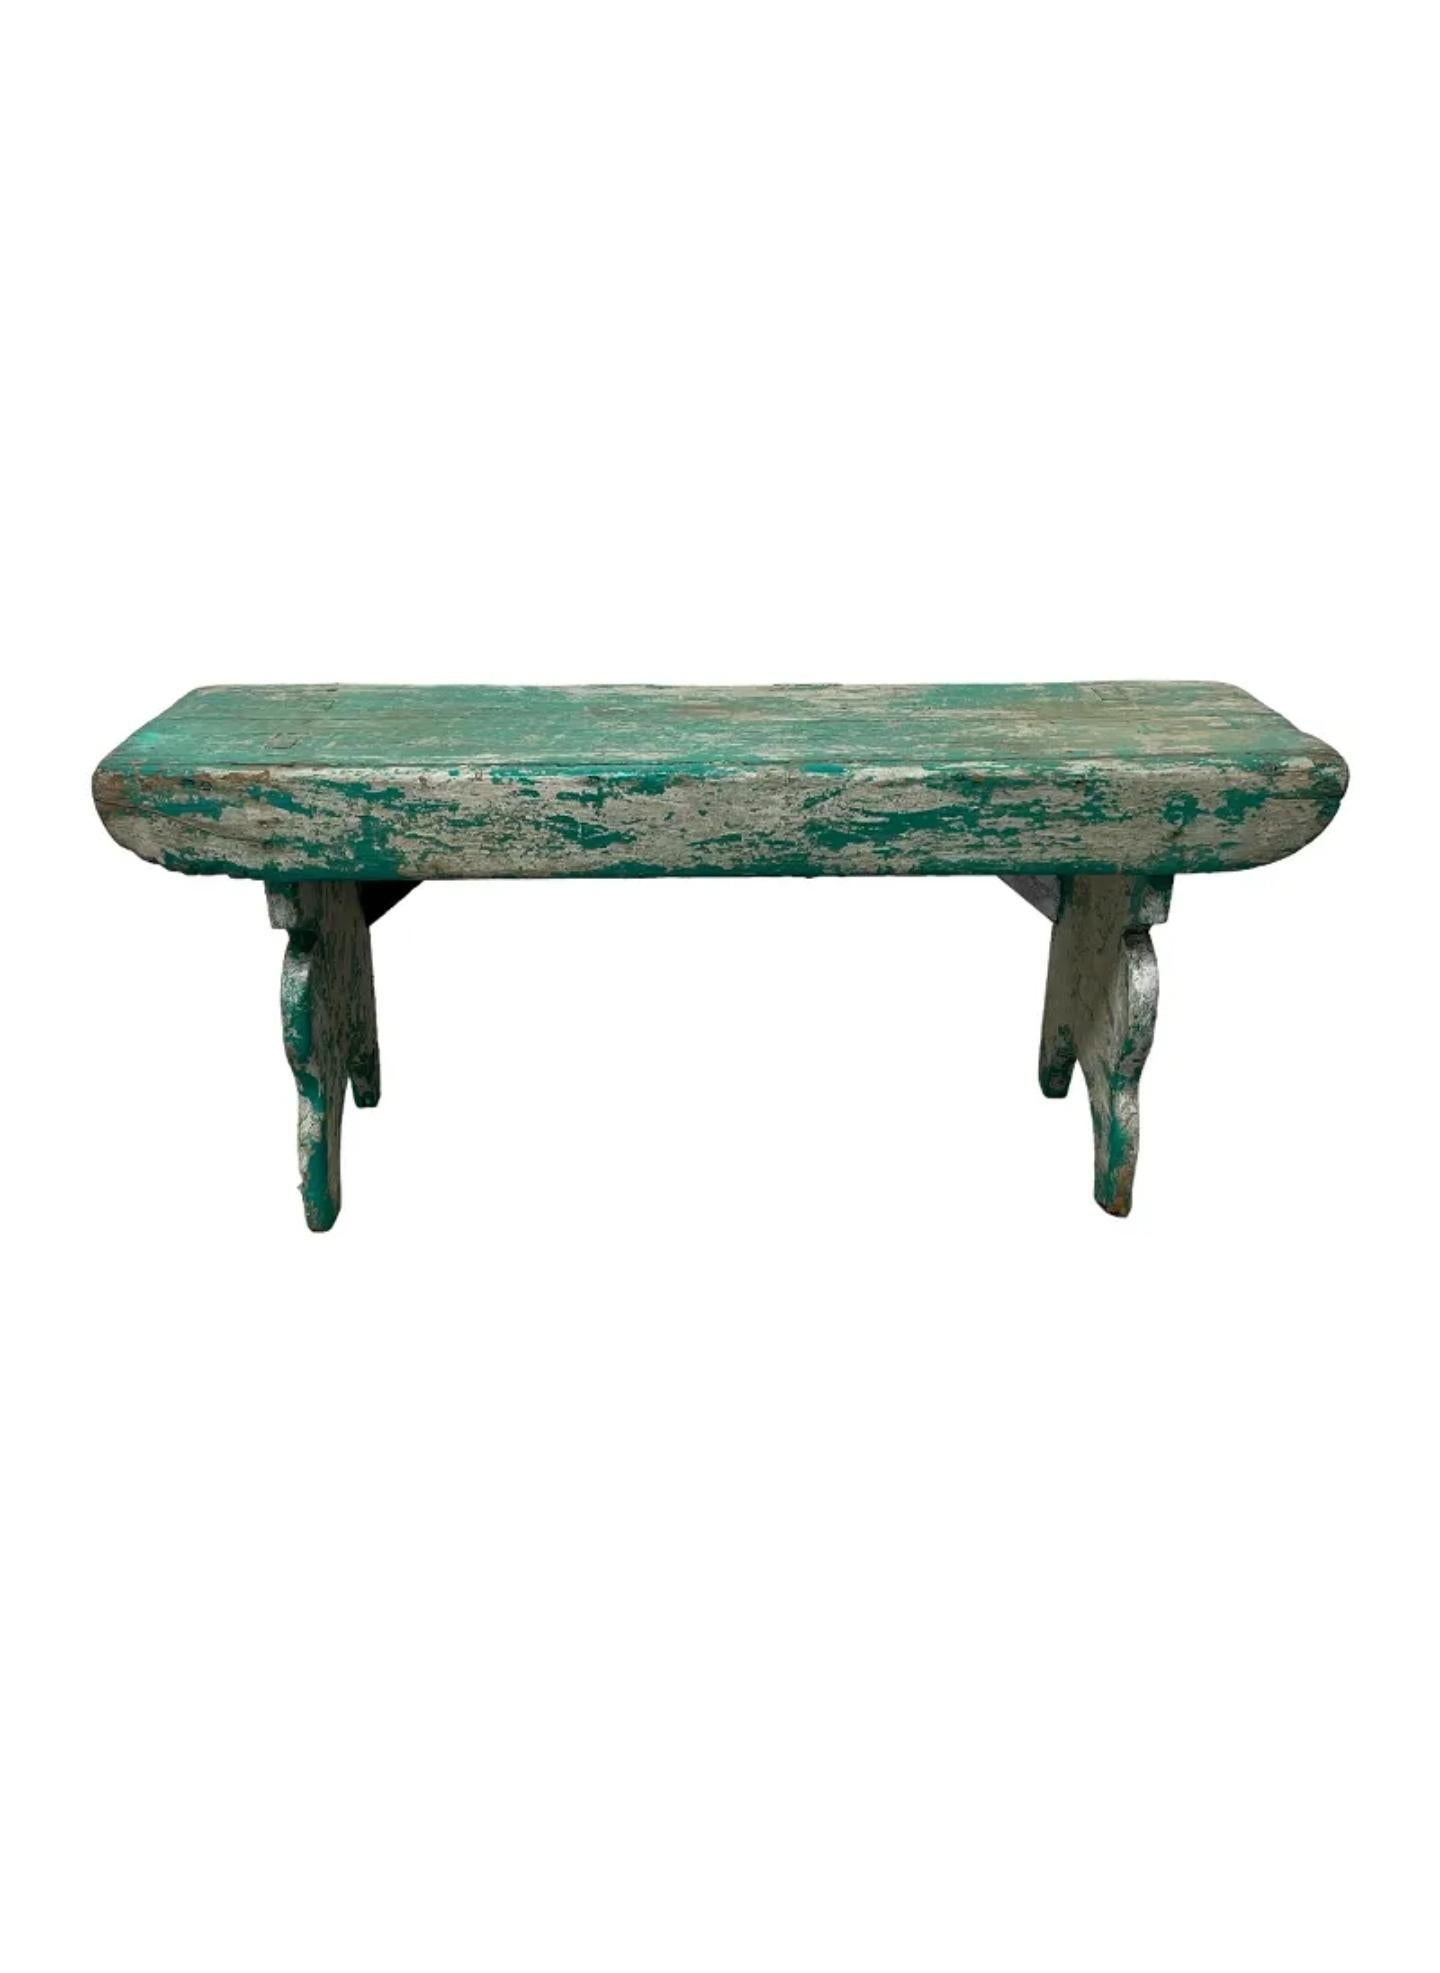 A wonderfully distressed antique early American Pennsylvania painted wooden bench with highly desirable heavily worn rustic patina.

Primitive hand-crafted solid wood construction, having a rectangular plank bench seat, quality mortise joinery,